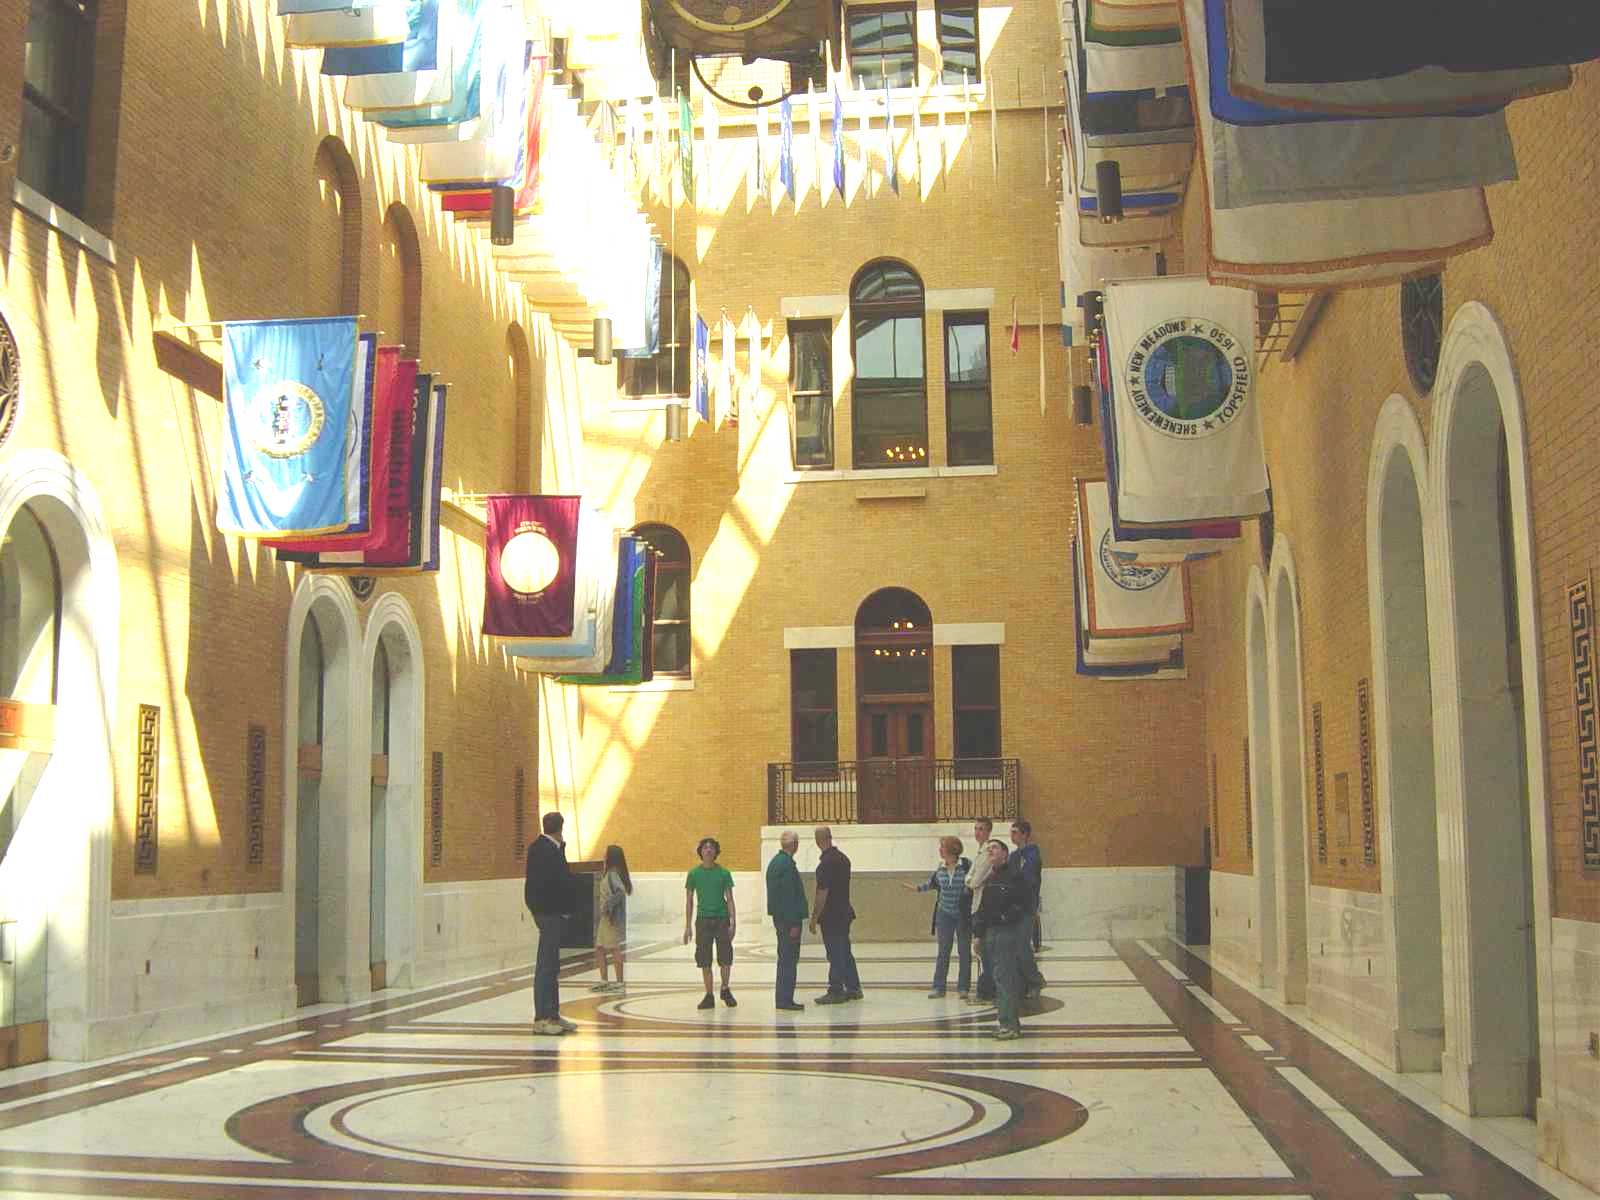 Flags in the Great Hall